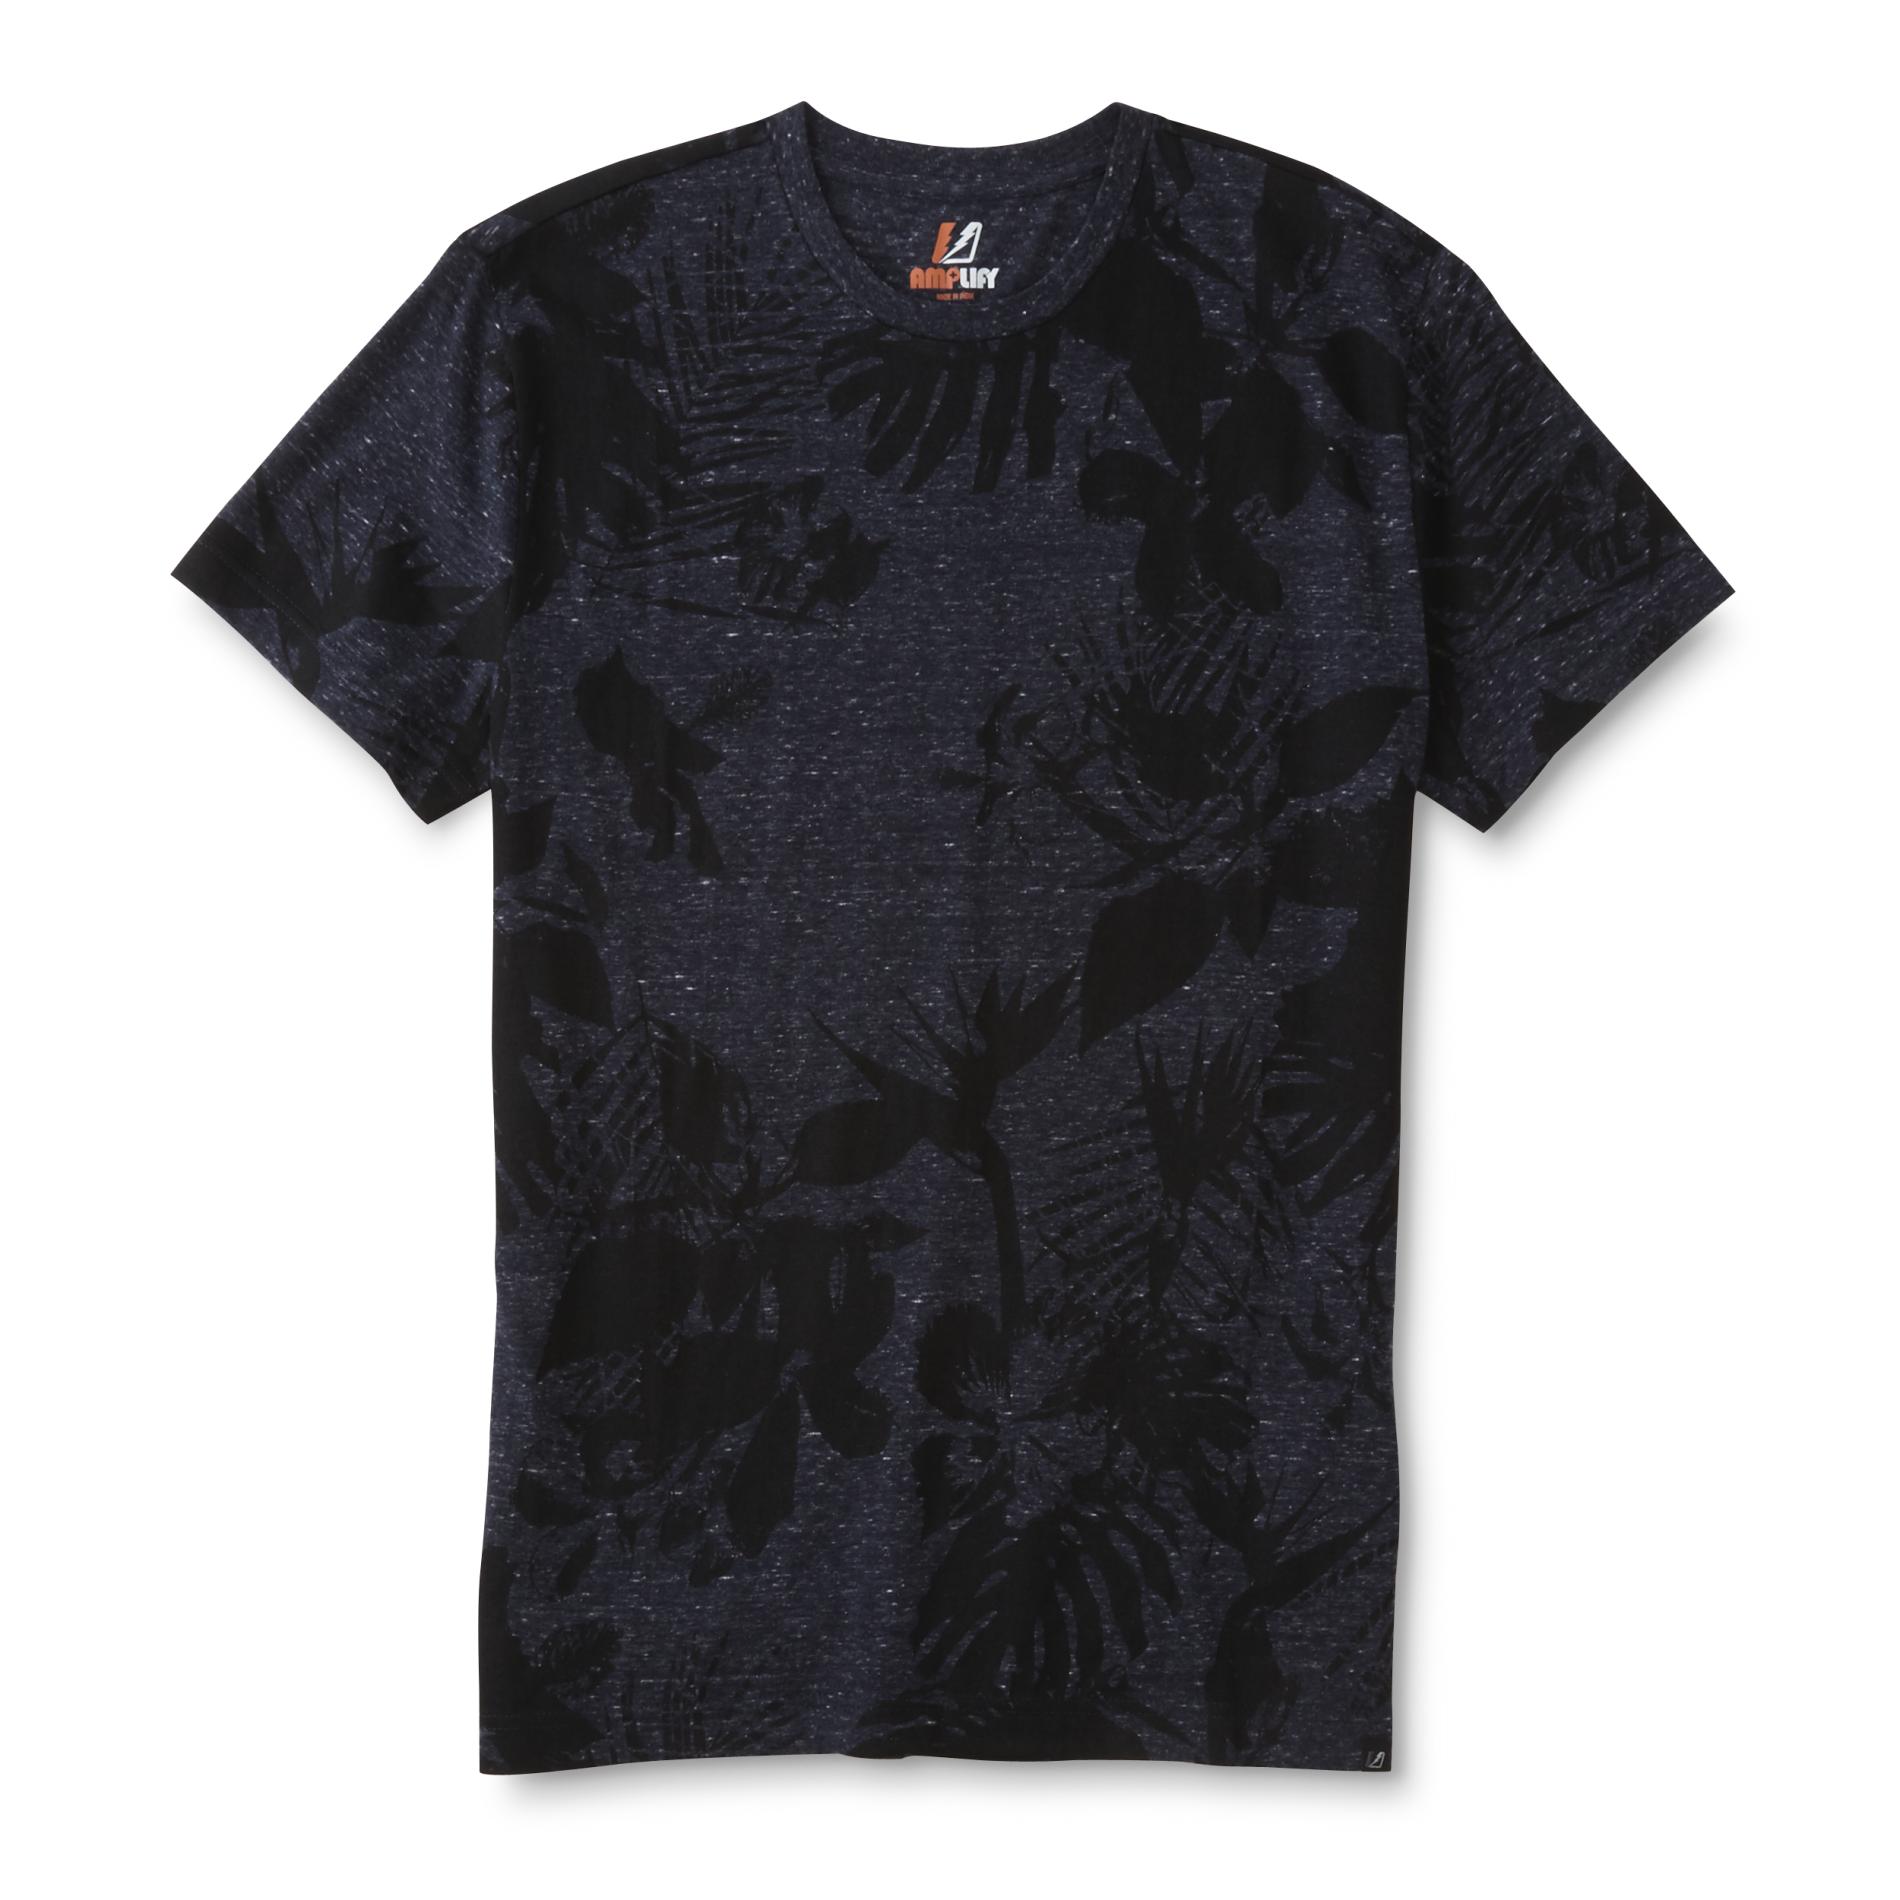 Amplify Young Men's T-Shirt - Dark Floral